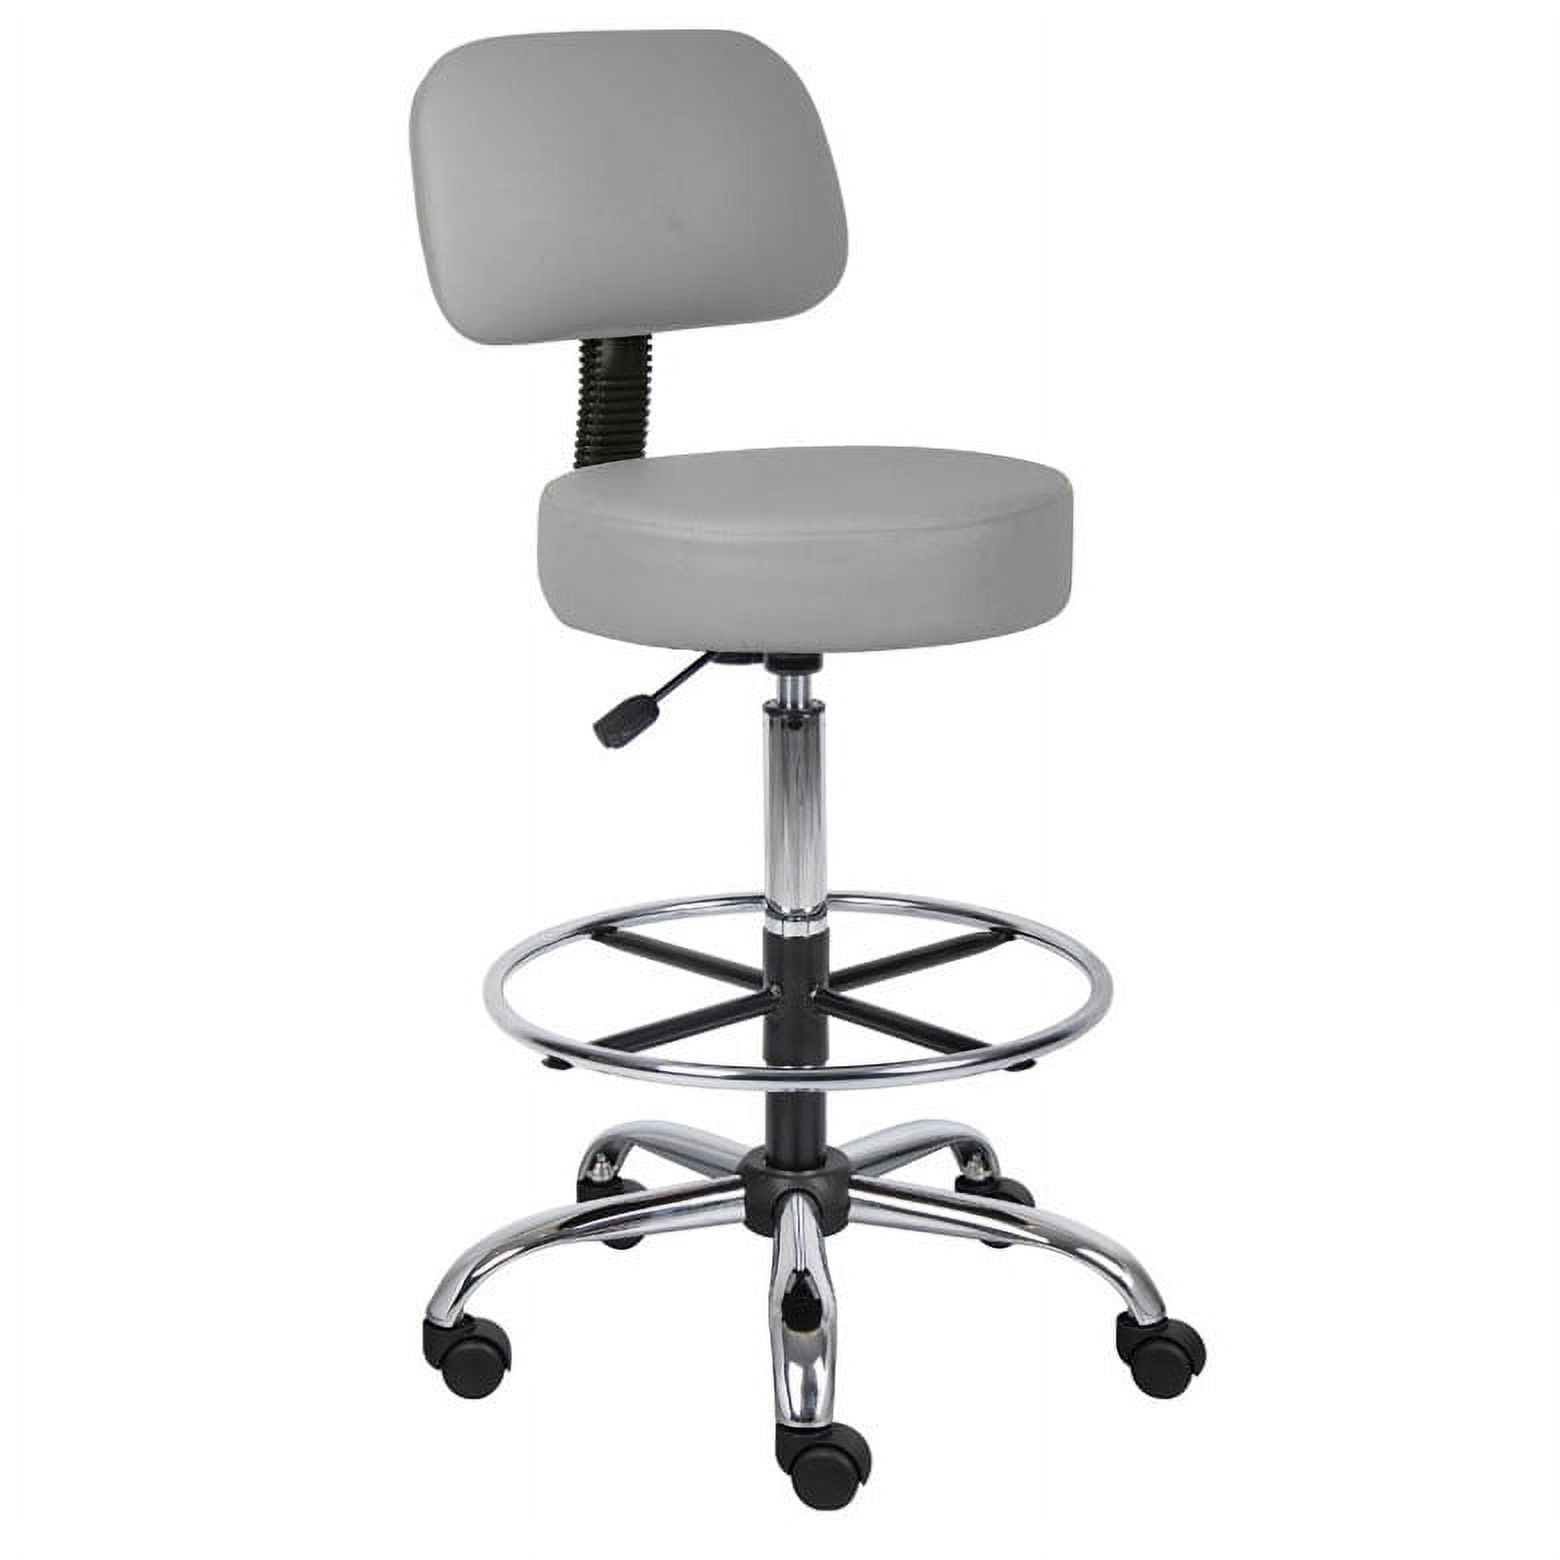 B16245-gy Caressoft Medical Drafting Stool With Back Cushion And Foot Ring- Grey